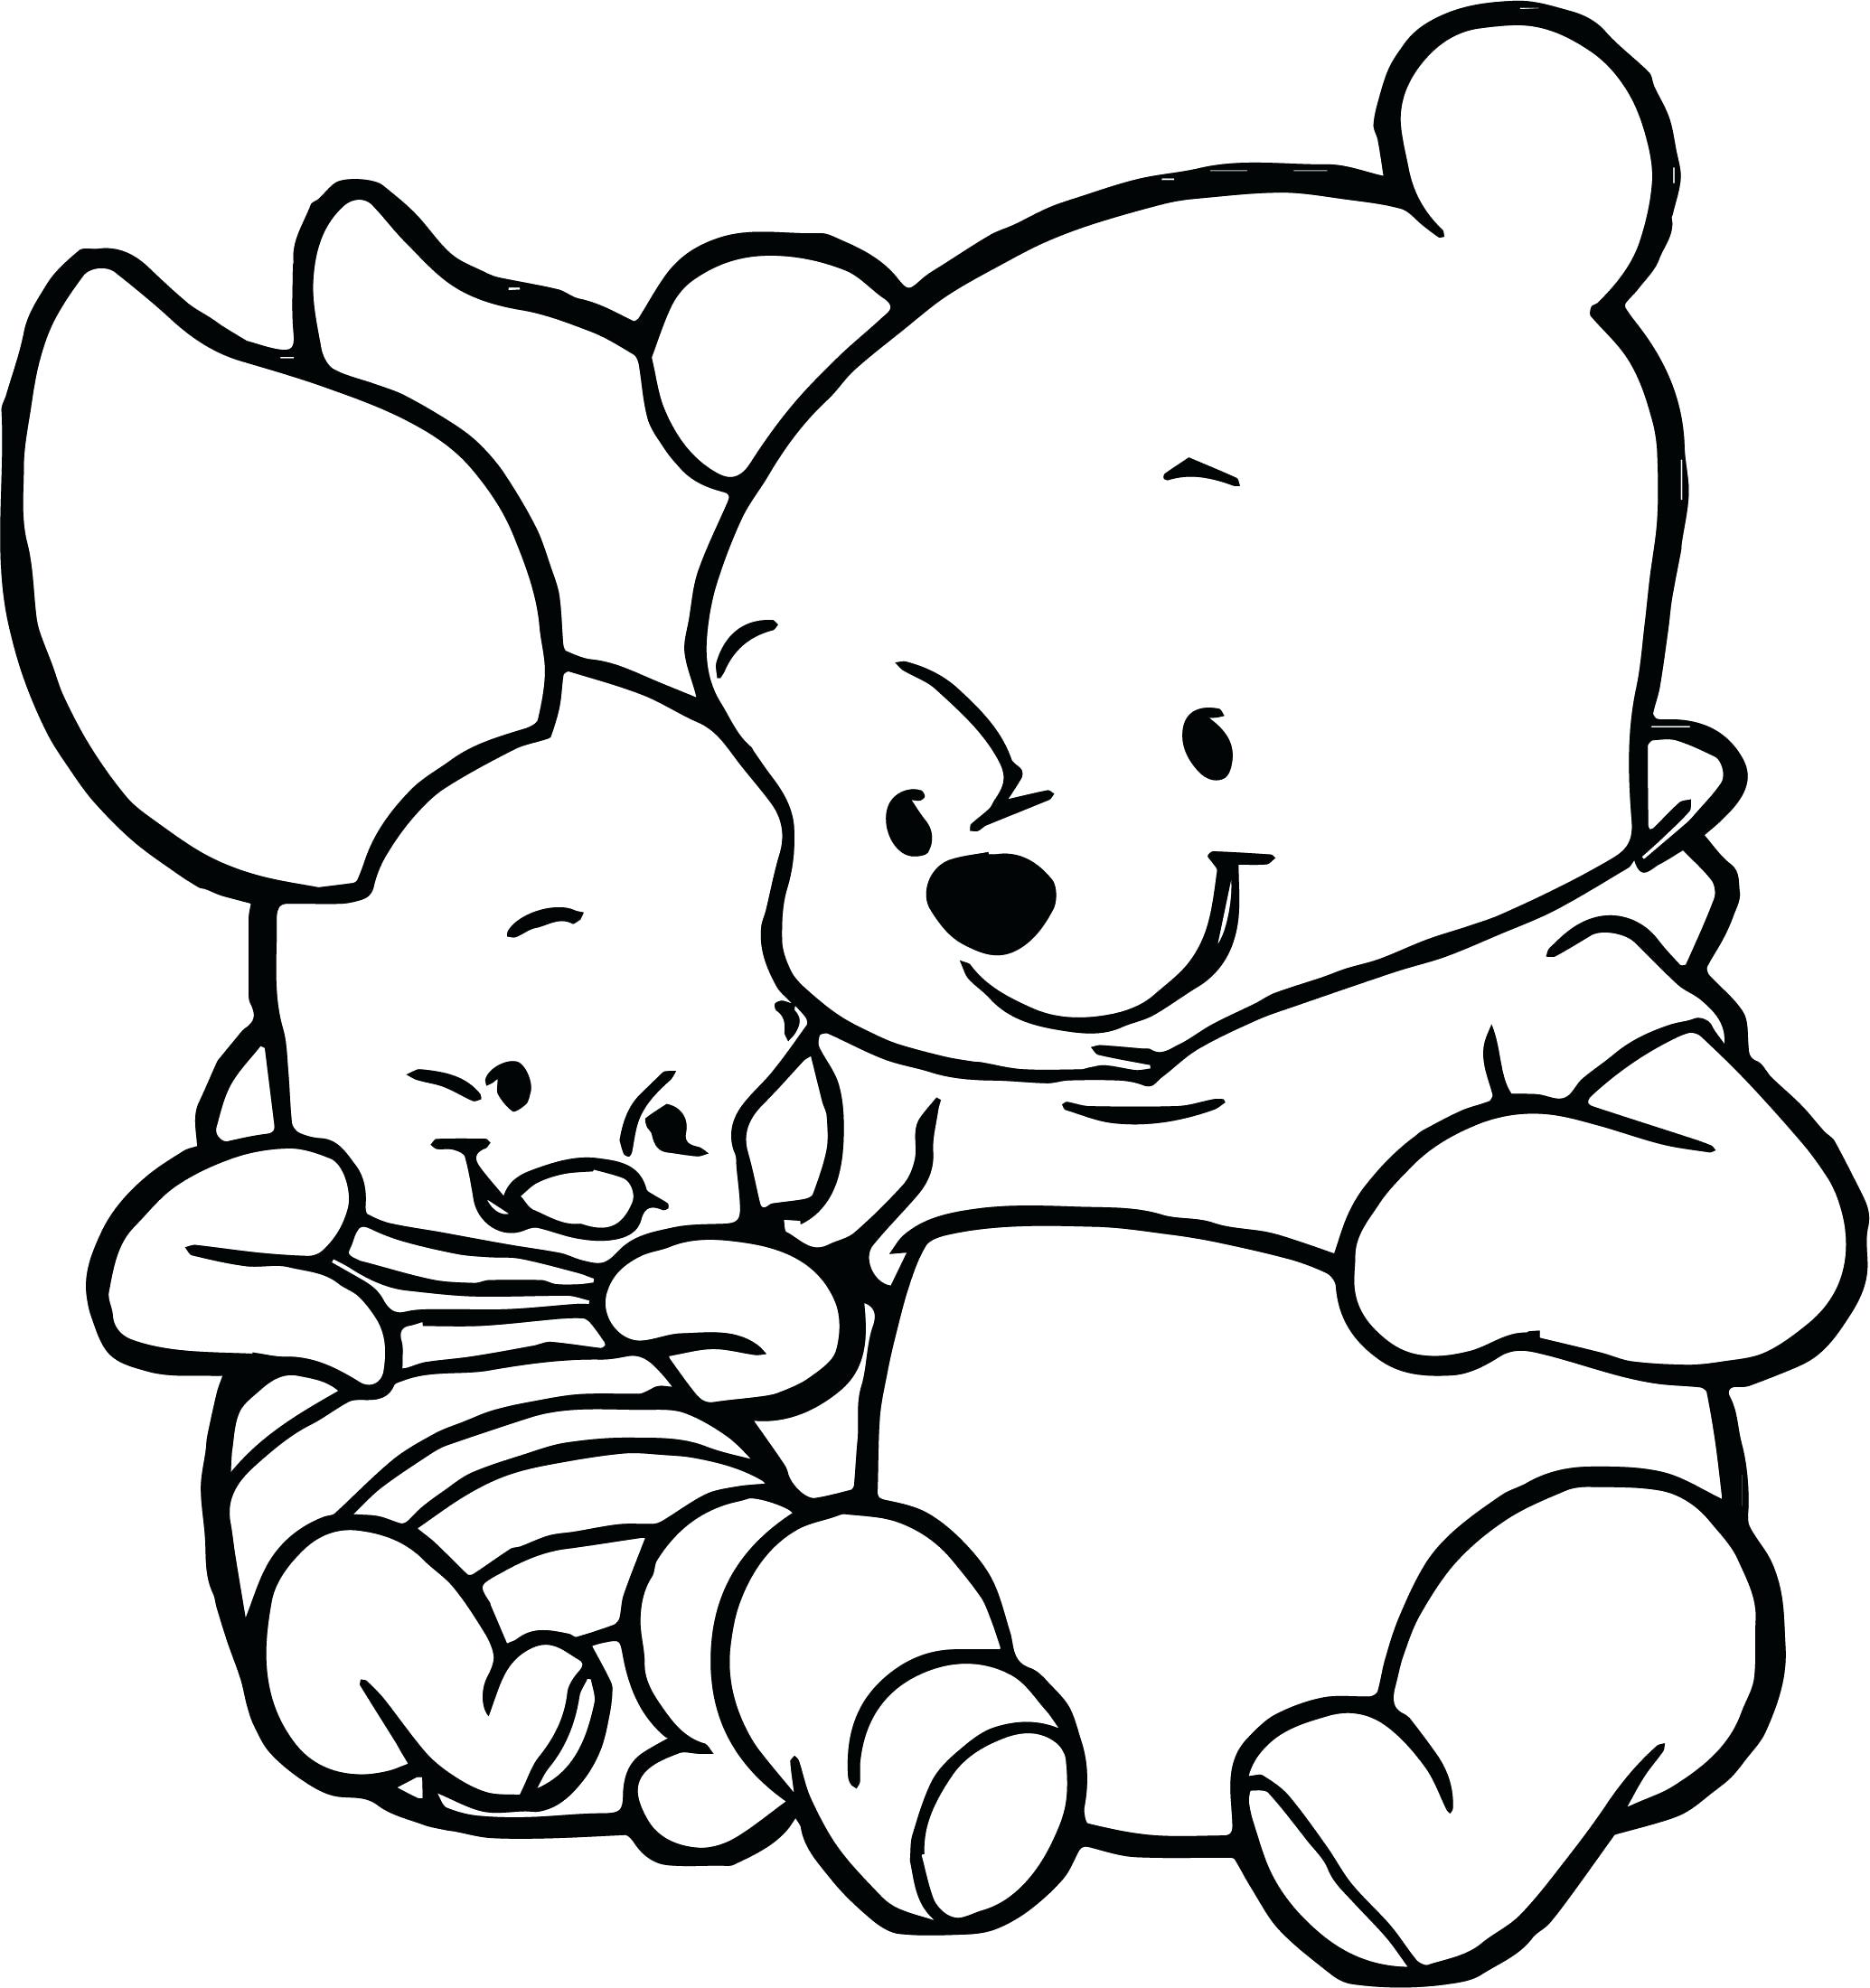 Cute Pig Coloring Pages at GetColorings.com | Free printable colorings